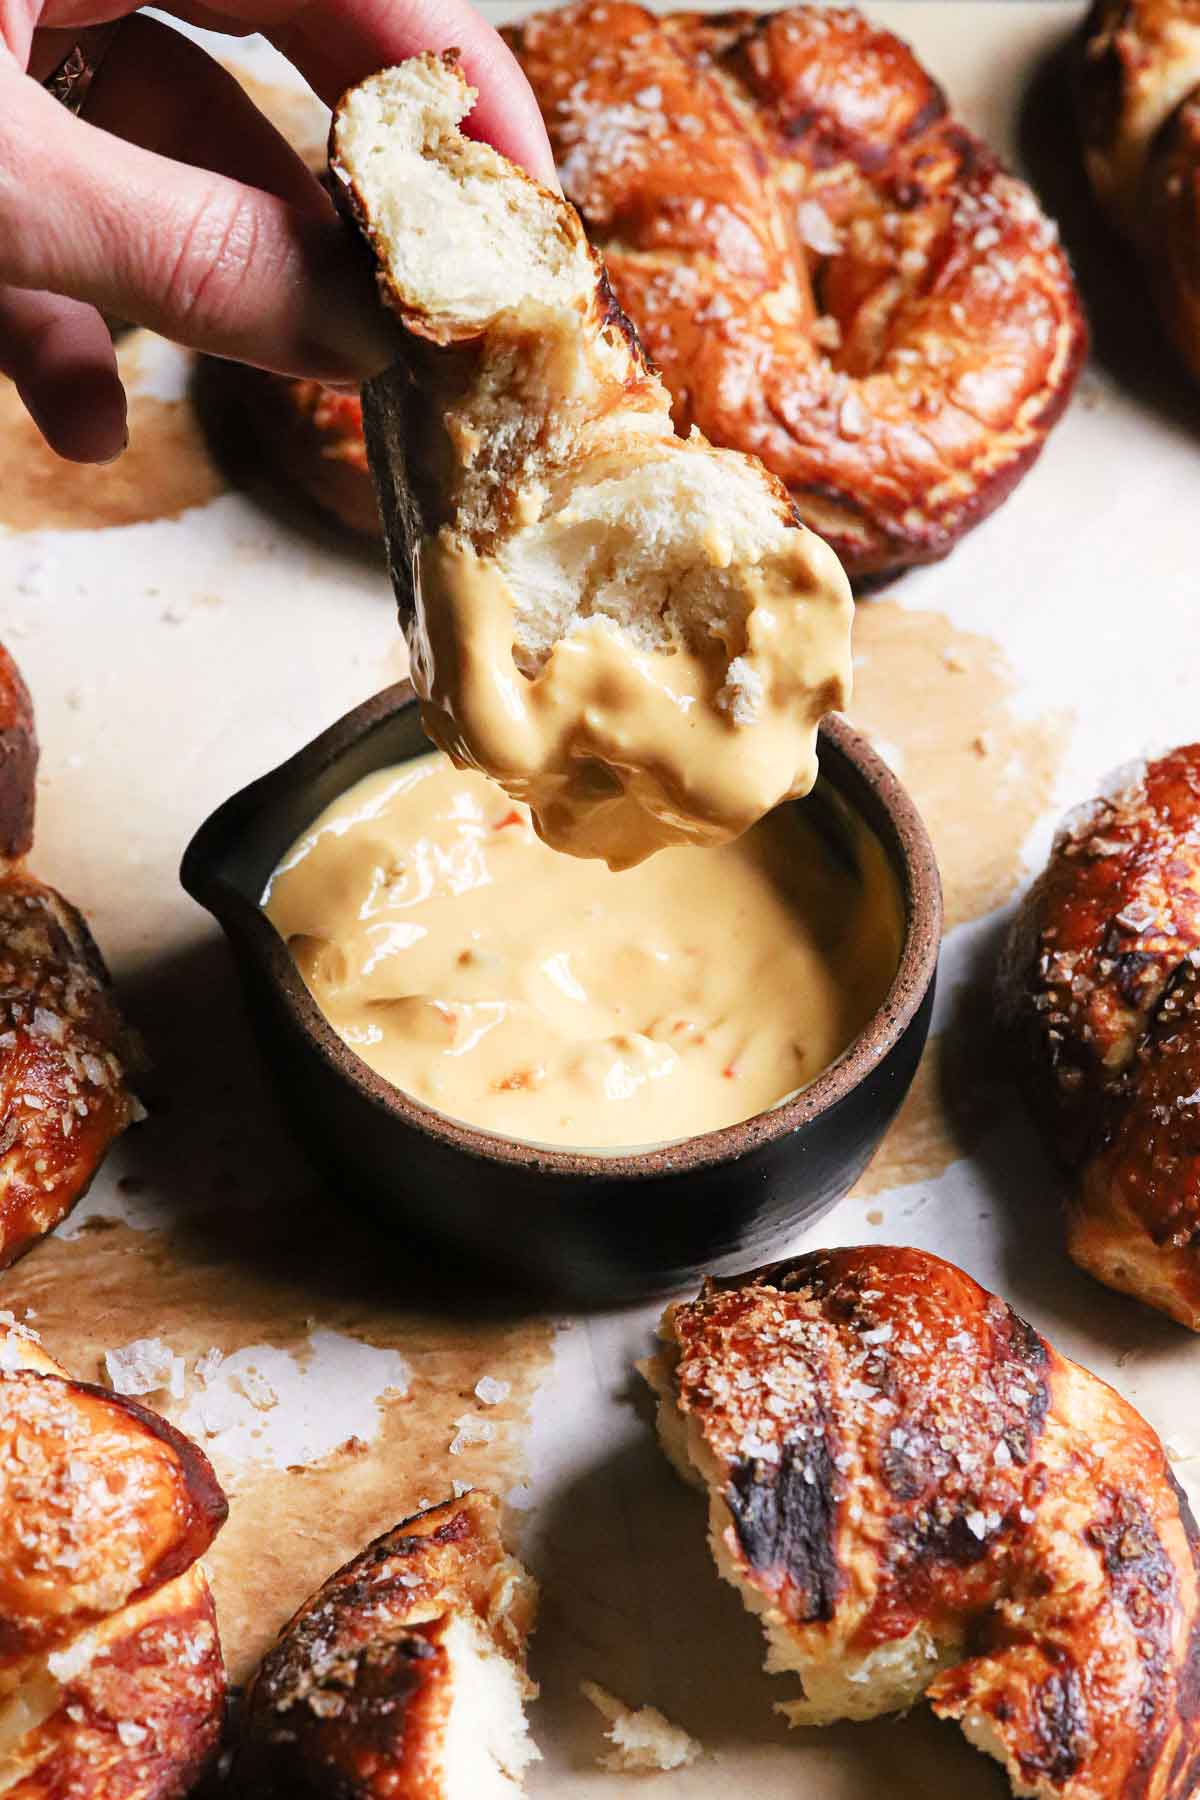 A soft pretzel being dipped into a small bowl of spicy cheese sauce.